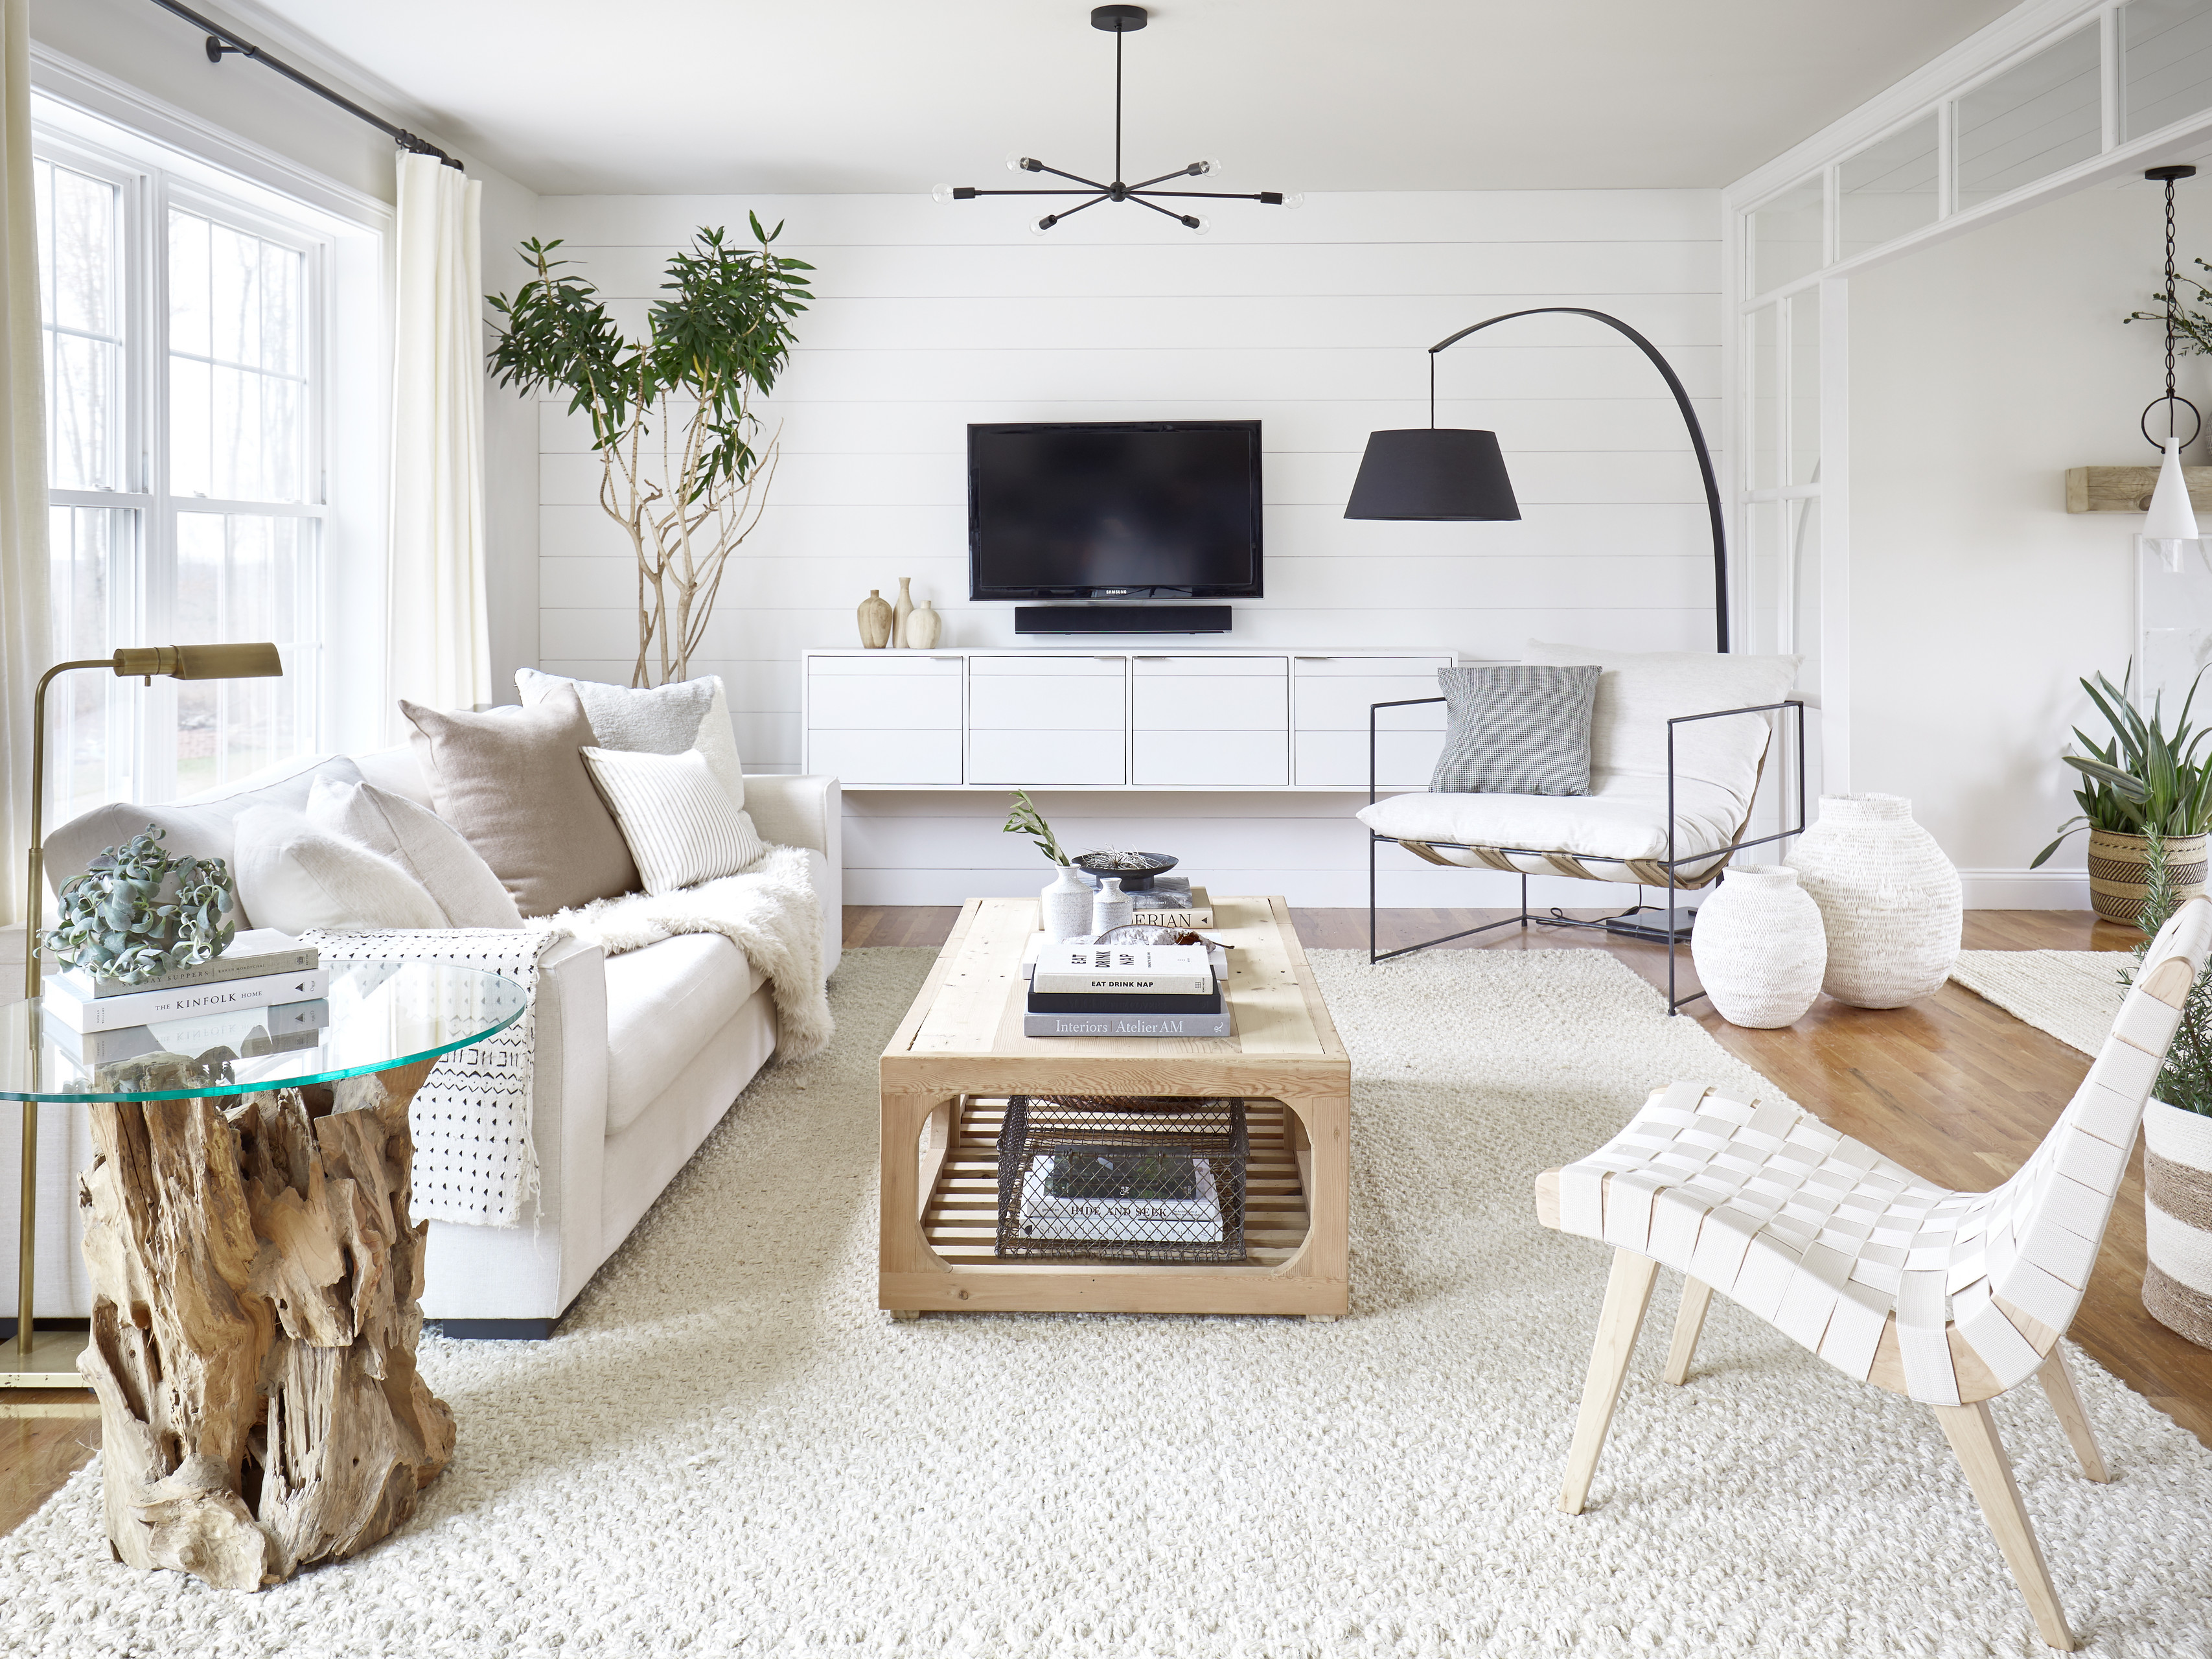 75 Beautiful Small Living Room Pictures Ideas December 2020 Houzz